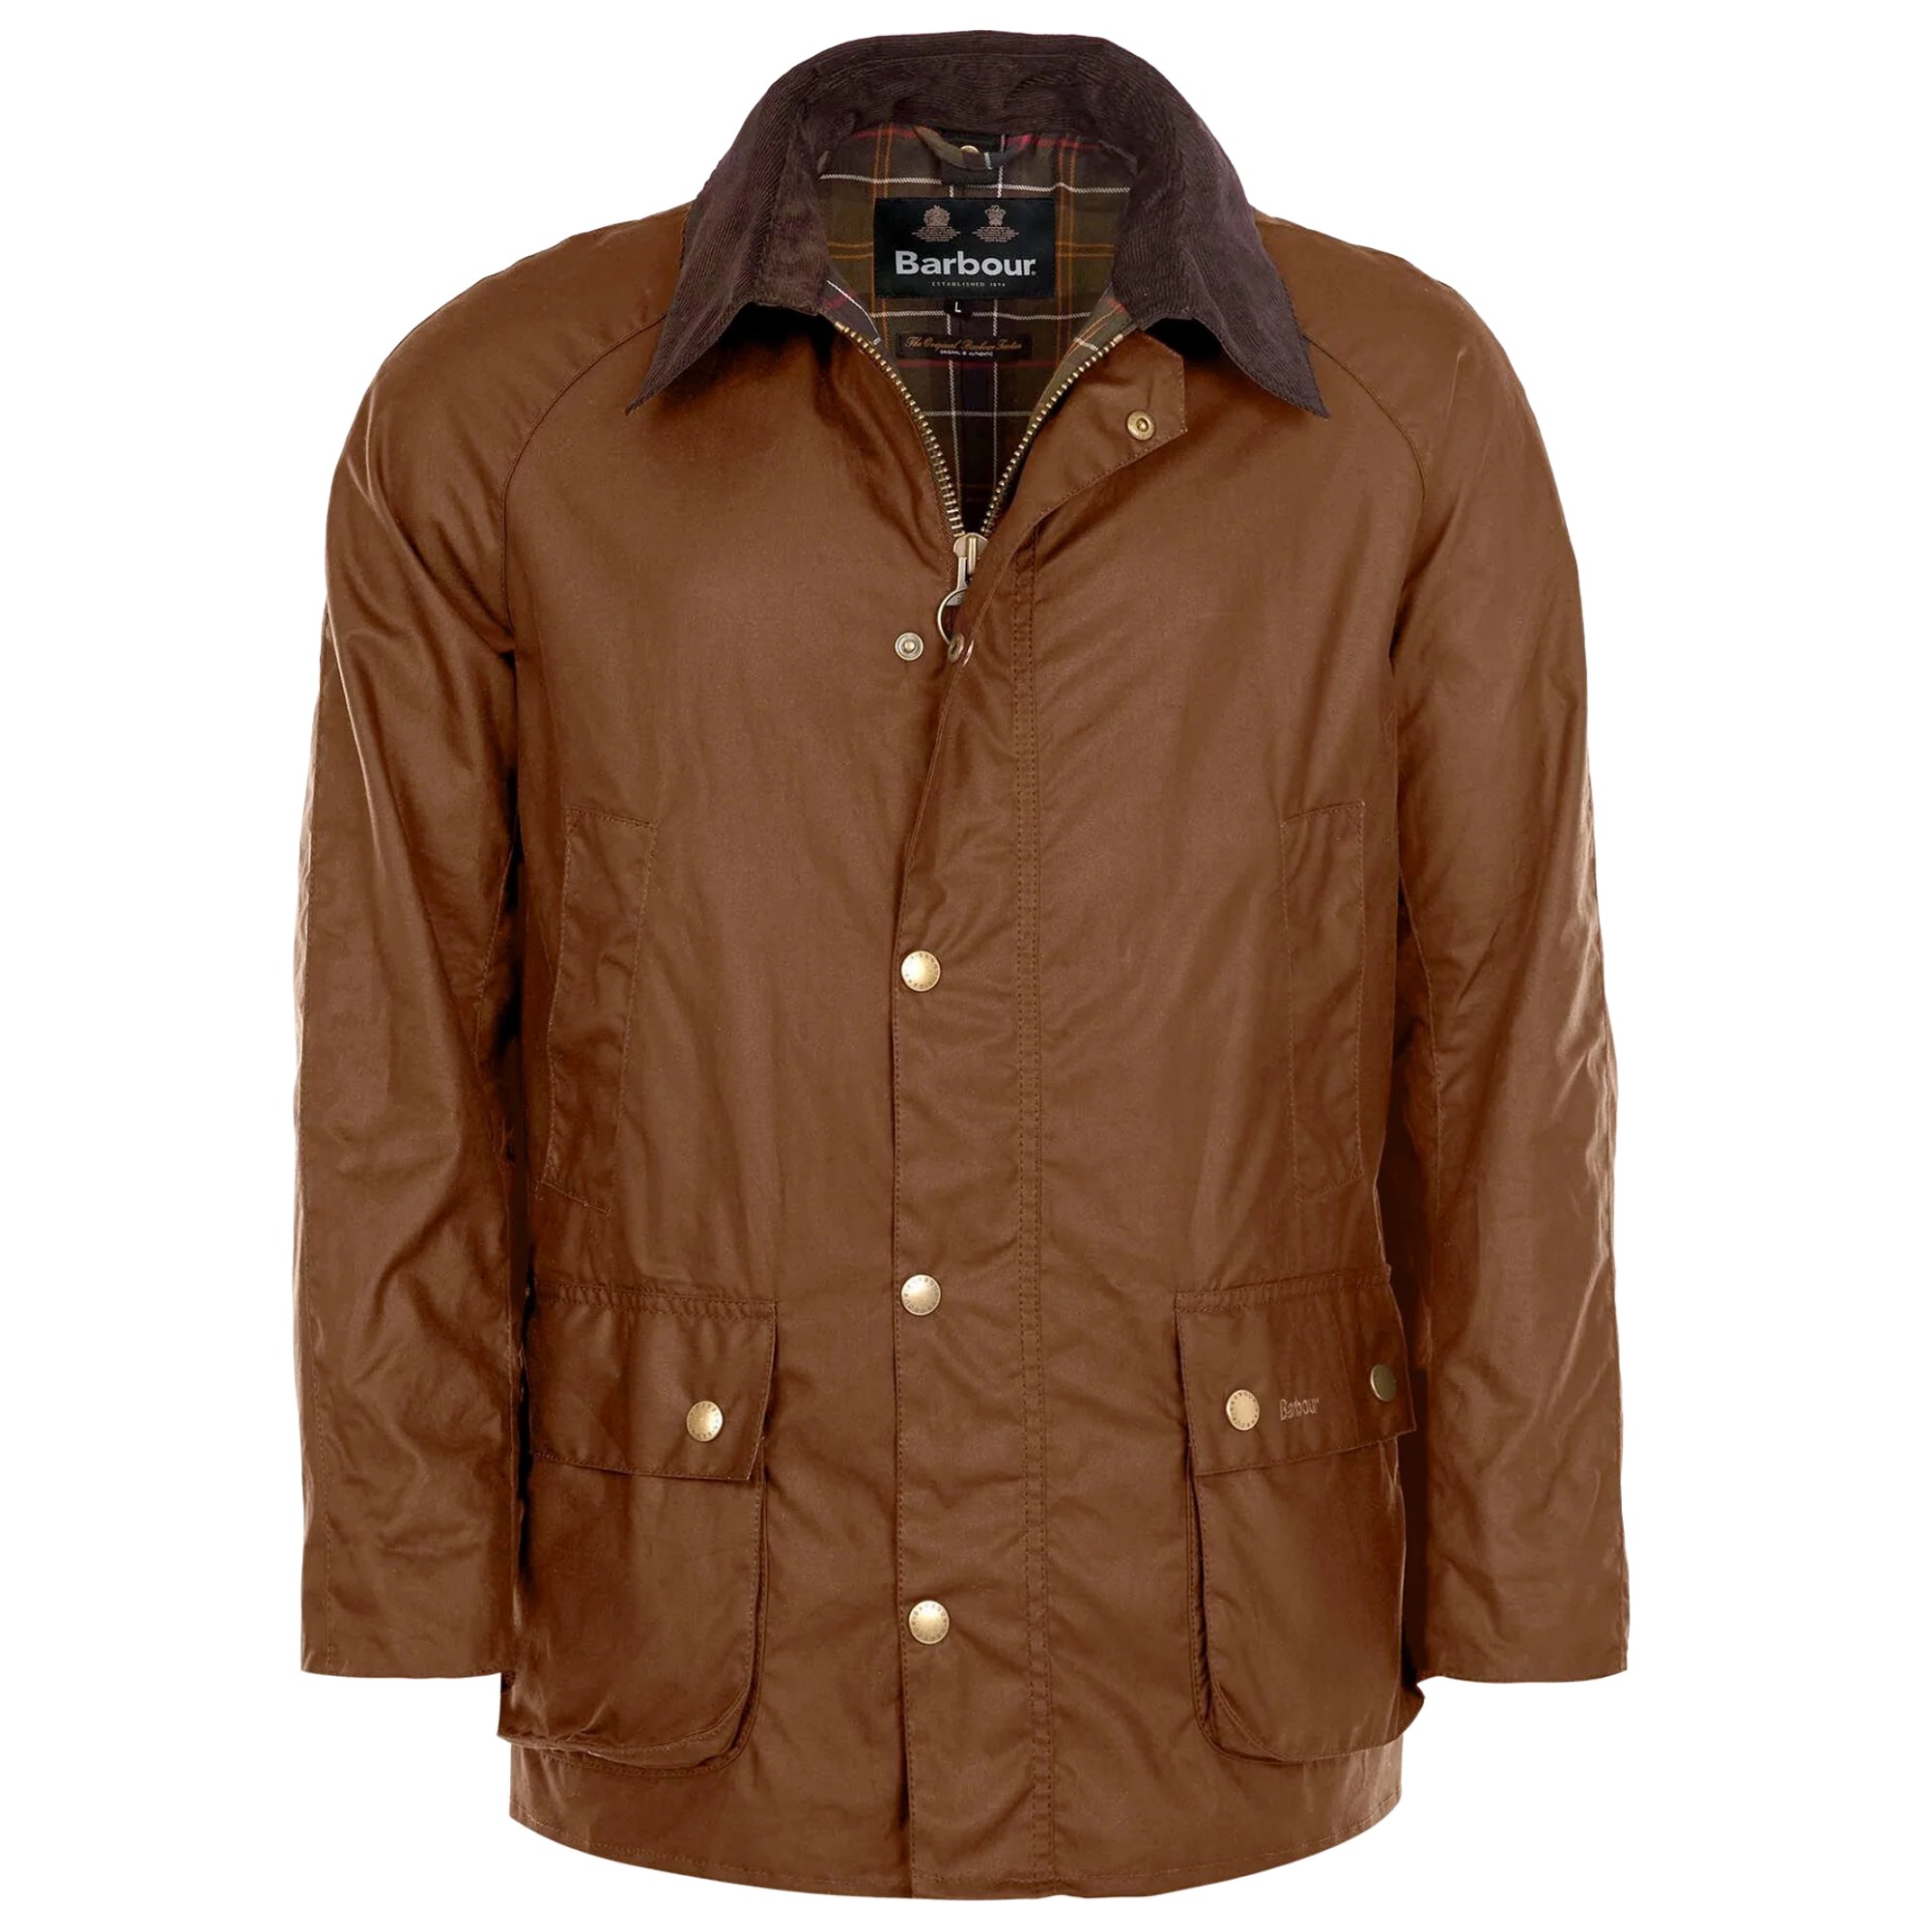 The QG, a men's retail store in Hunt Valley, is selling a wax jacket from the company Barbour.